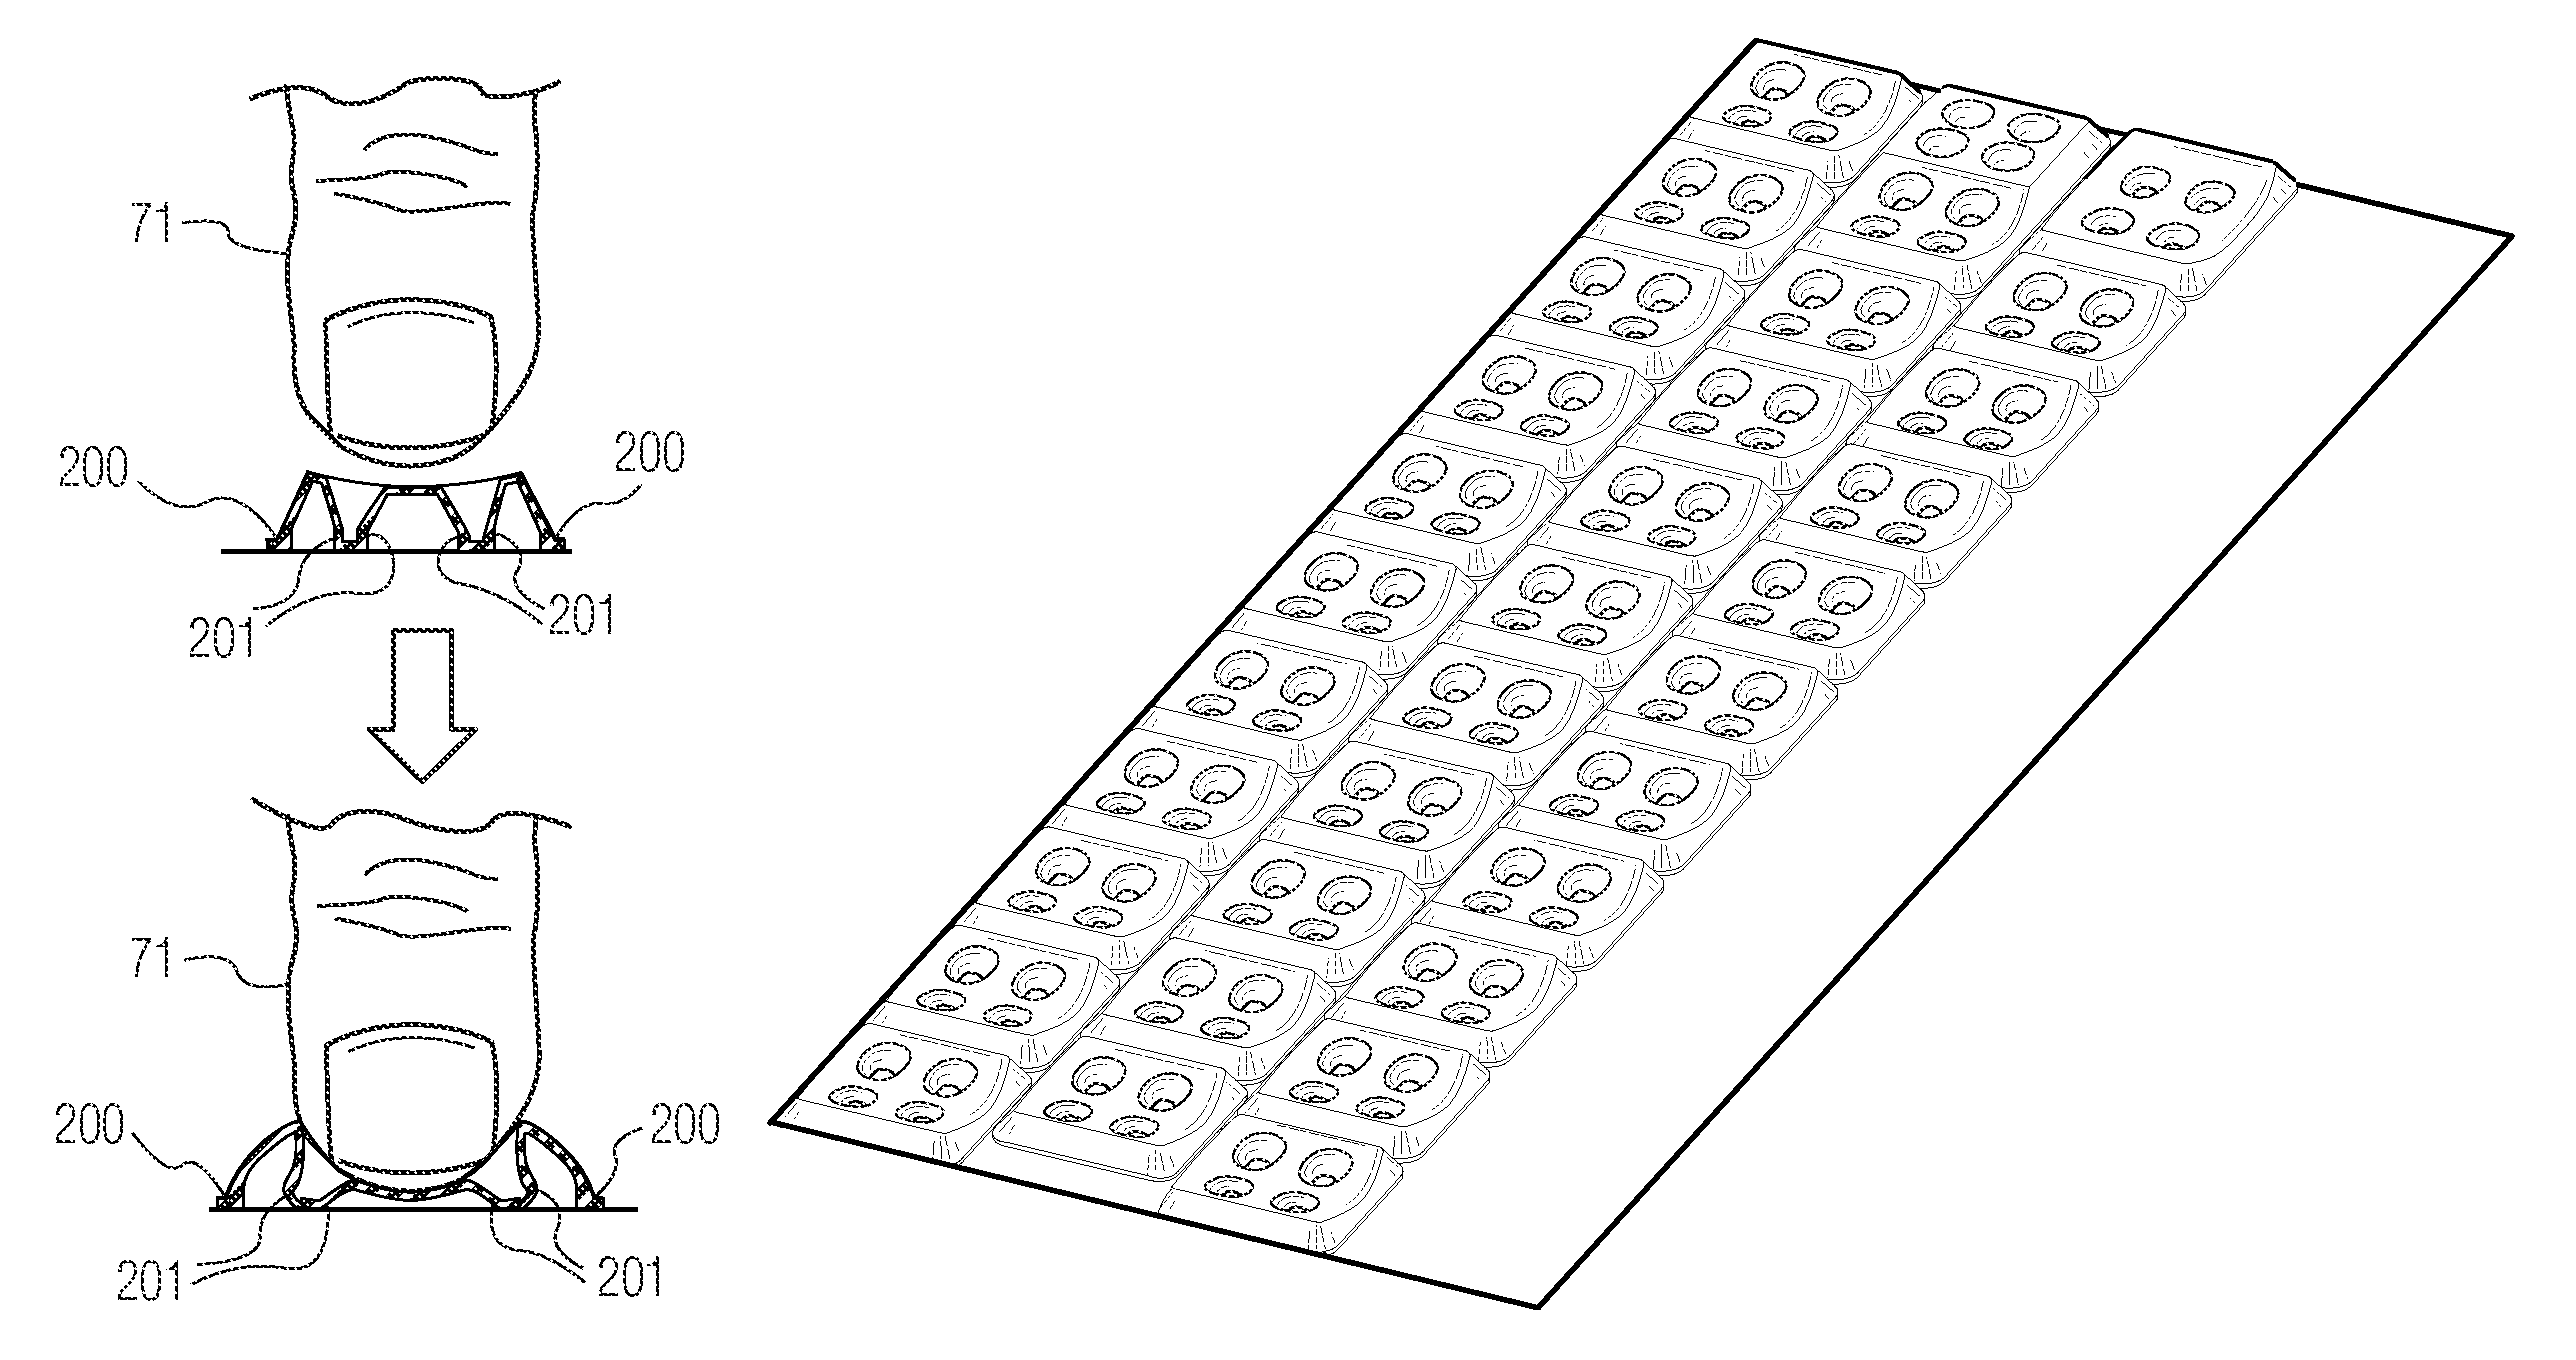 Keyboard overlay for optimal touch typing on a proximity-based touch screen